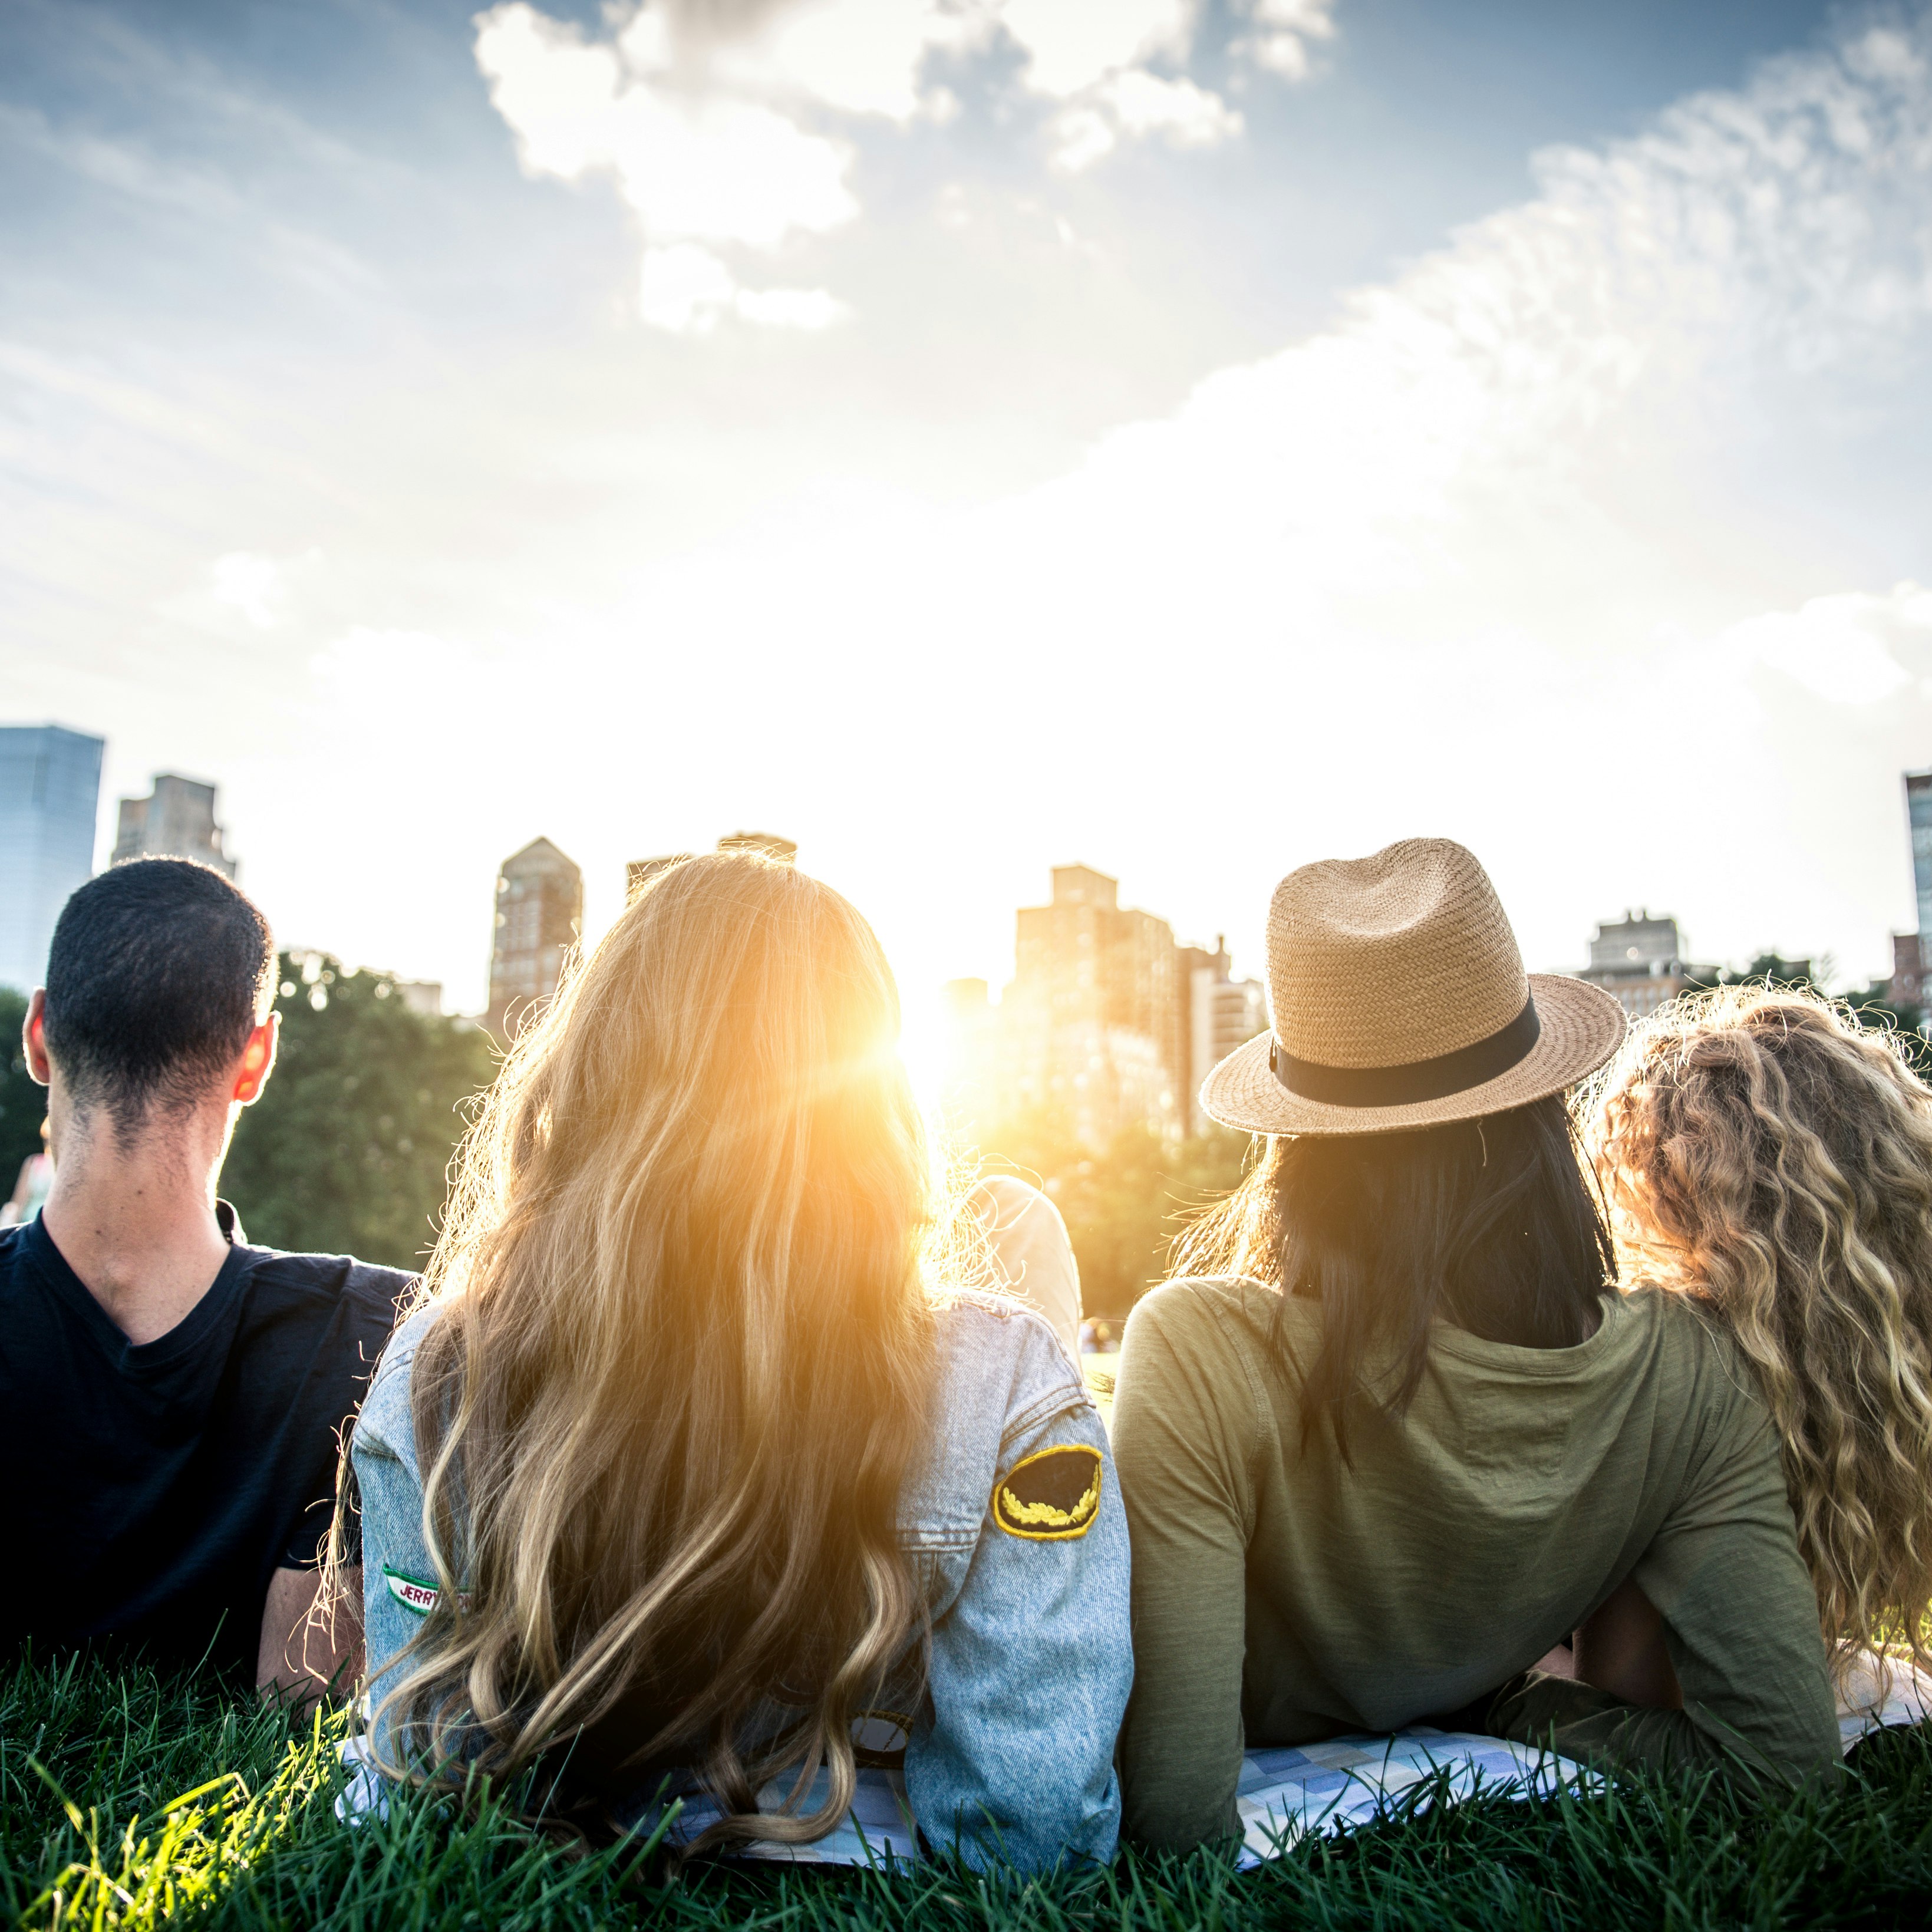 Four people seen from behind, reclining in the grass and looking at the NYC skyline